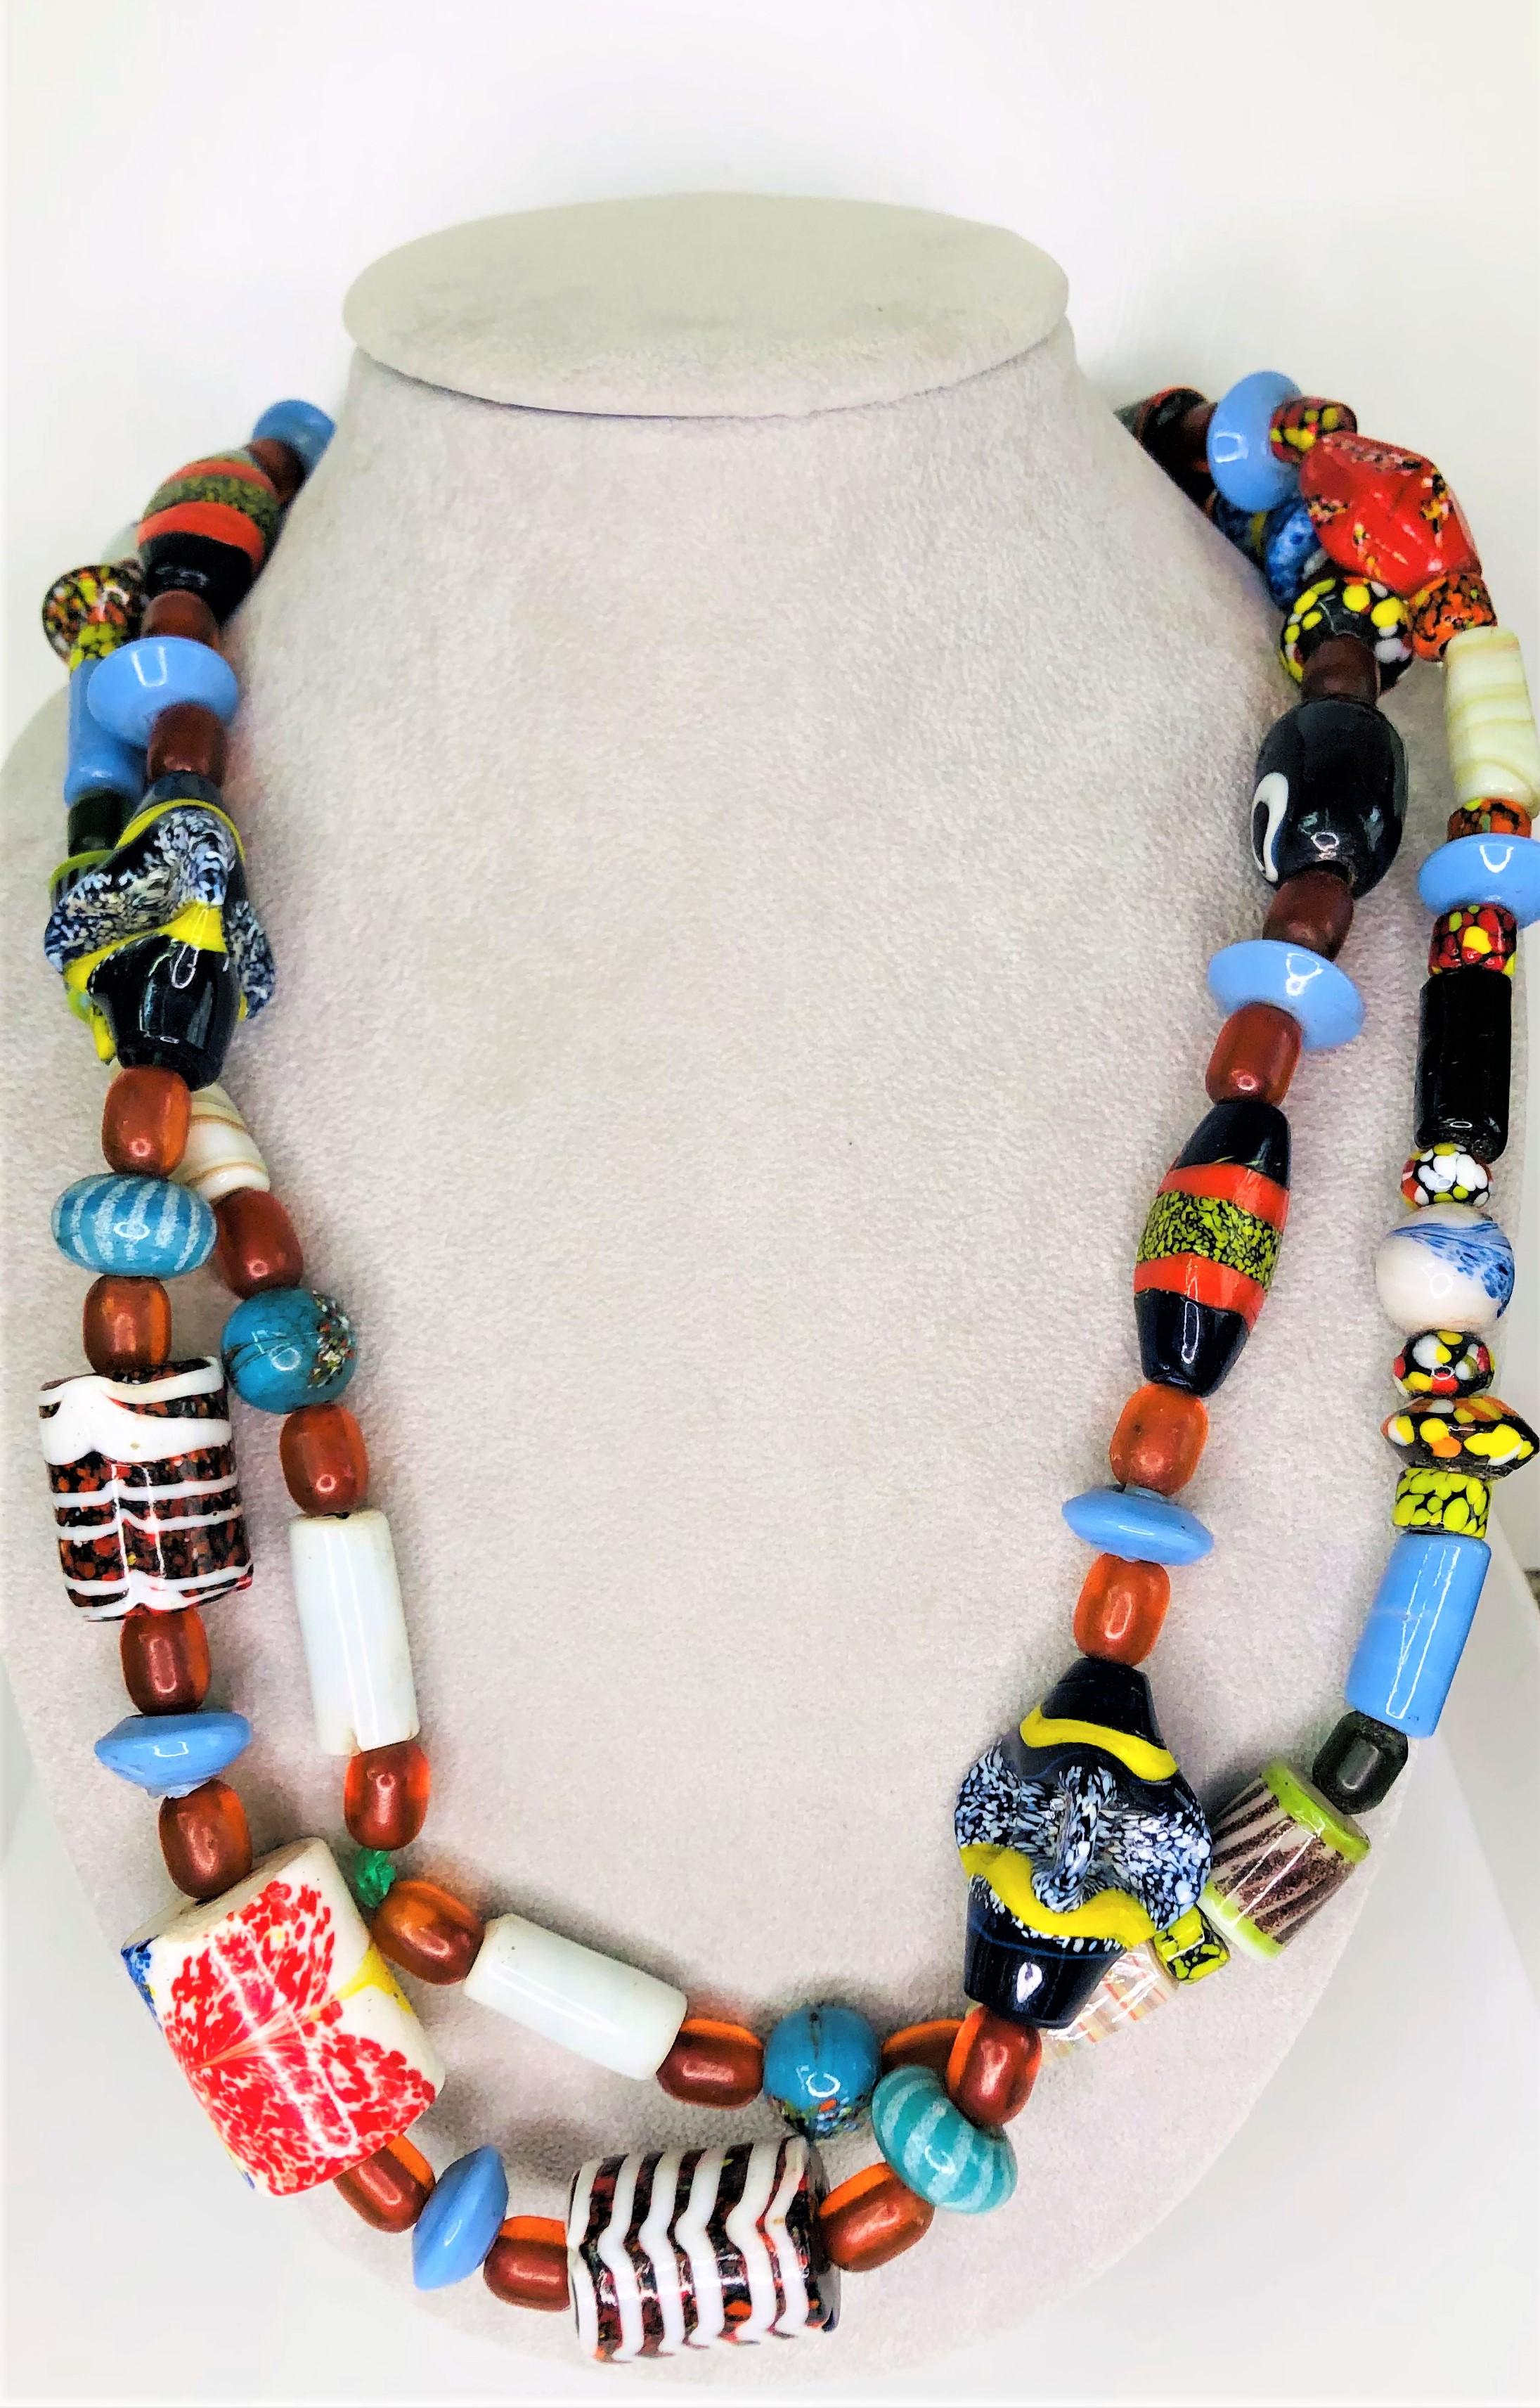 This unique necklace will match lots of clothing and be admired by all!  
It is a piece of wearable art!
99 pieces of varying shapes and colors.
Approximately 53 inches long.
Largest bead is approximately 22mm x 29mm
Smallest bead is approximately